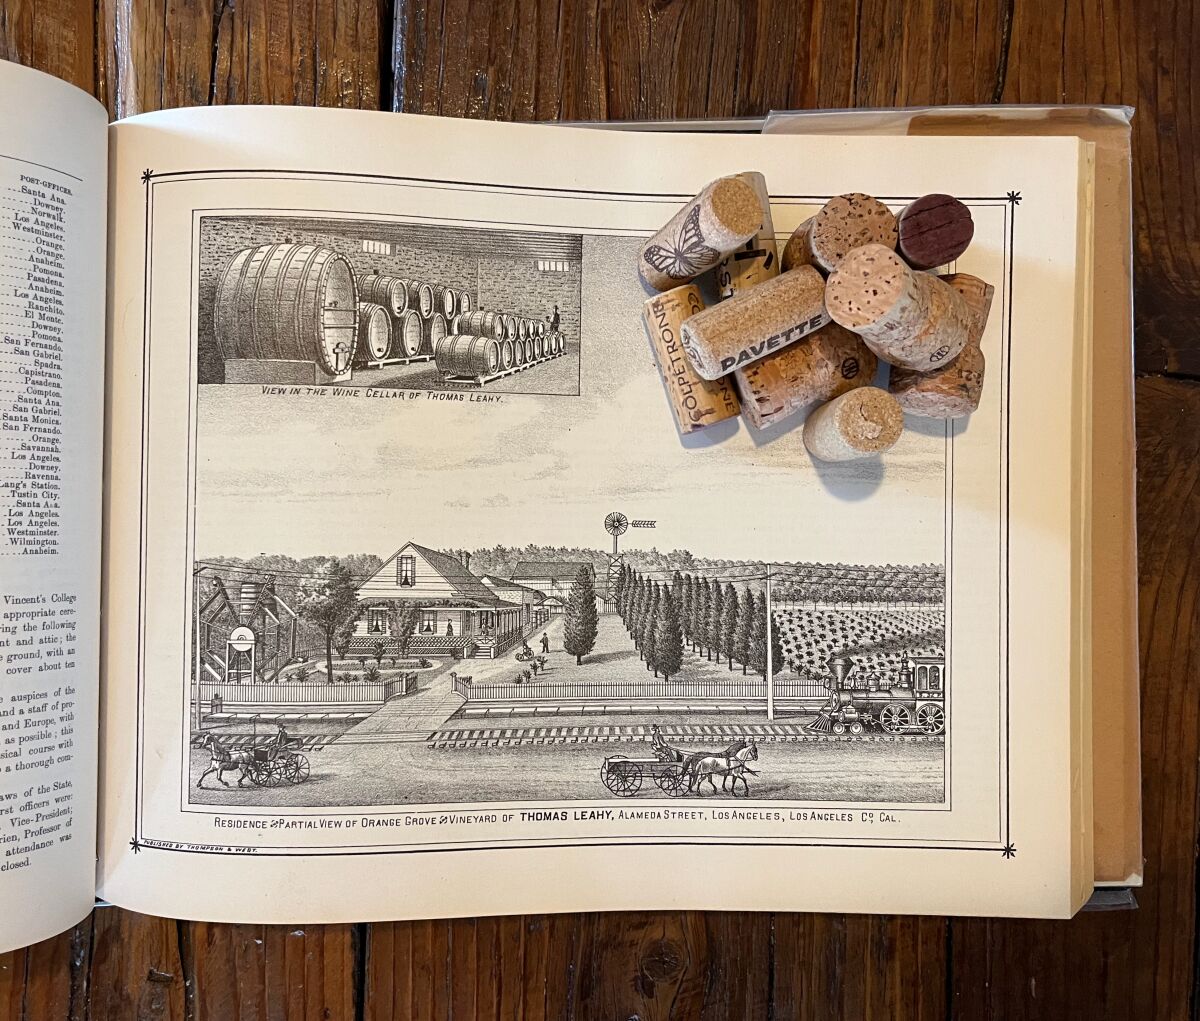 An open book shows black and white images of wine barrels and a farm, with corks from wine bottles arranged on the page